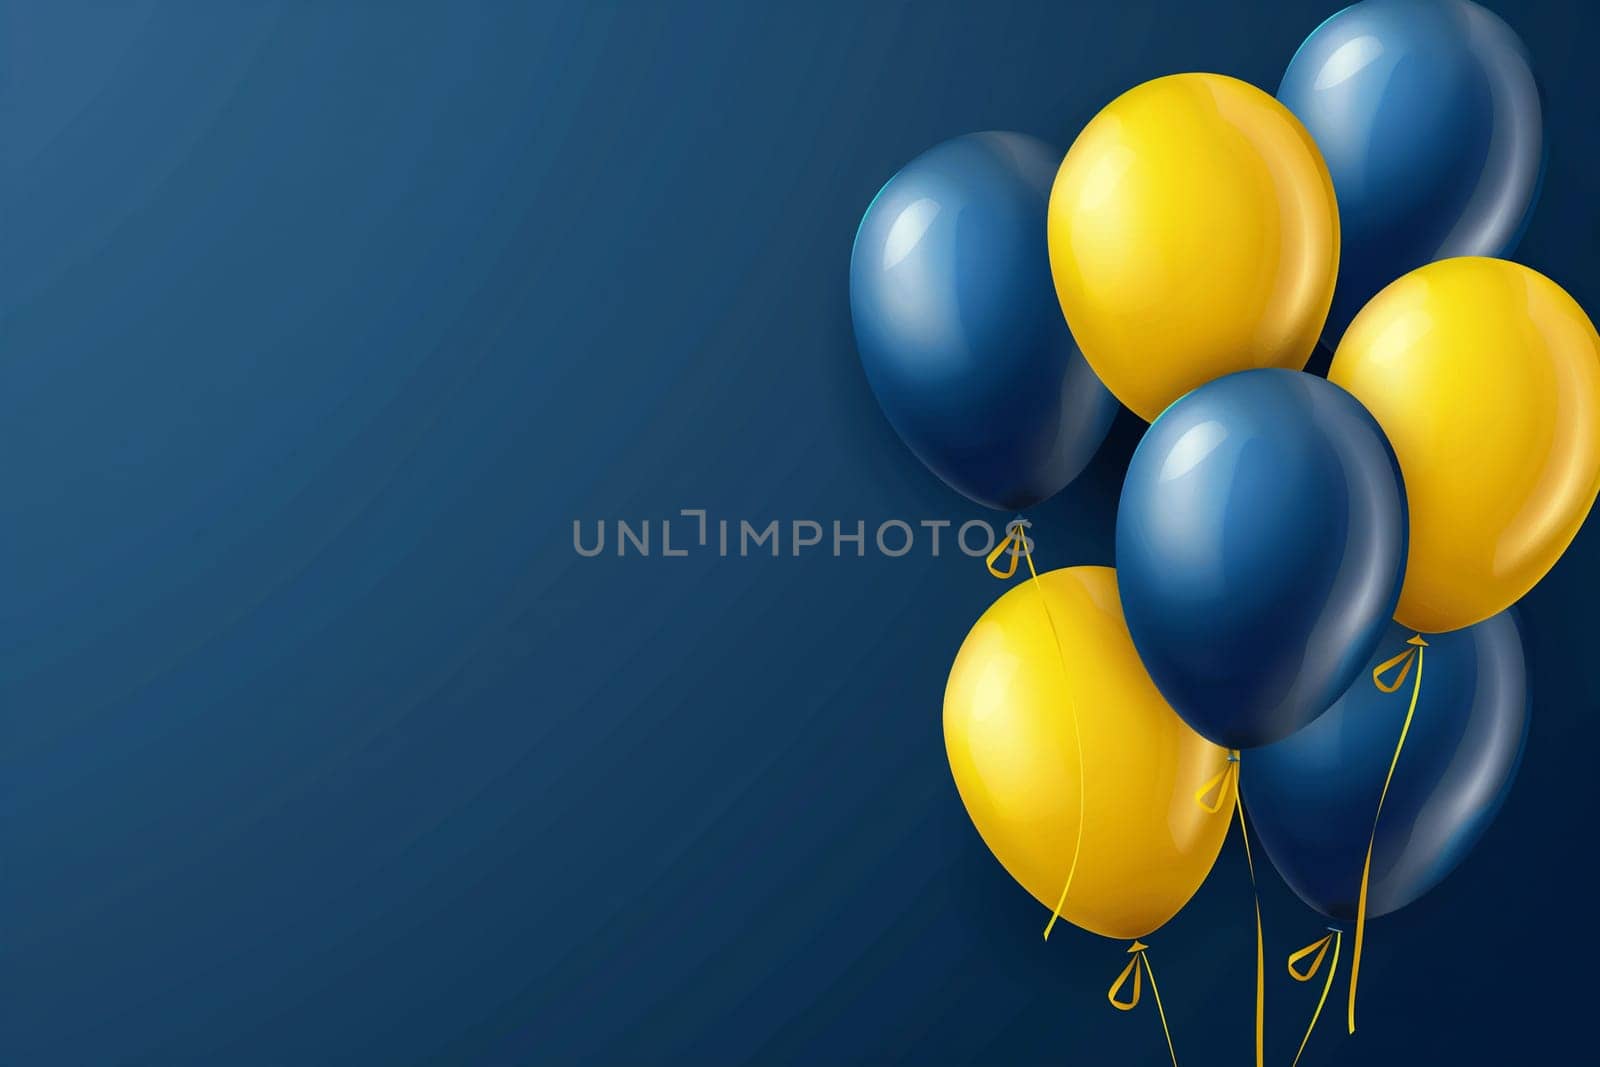 Blue and Yellow Balloons on Blue Background by Sd28DimoN_1976